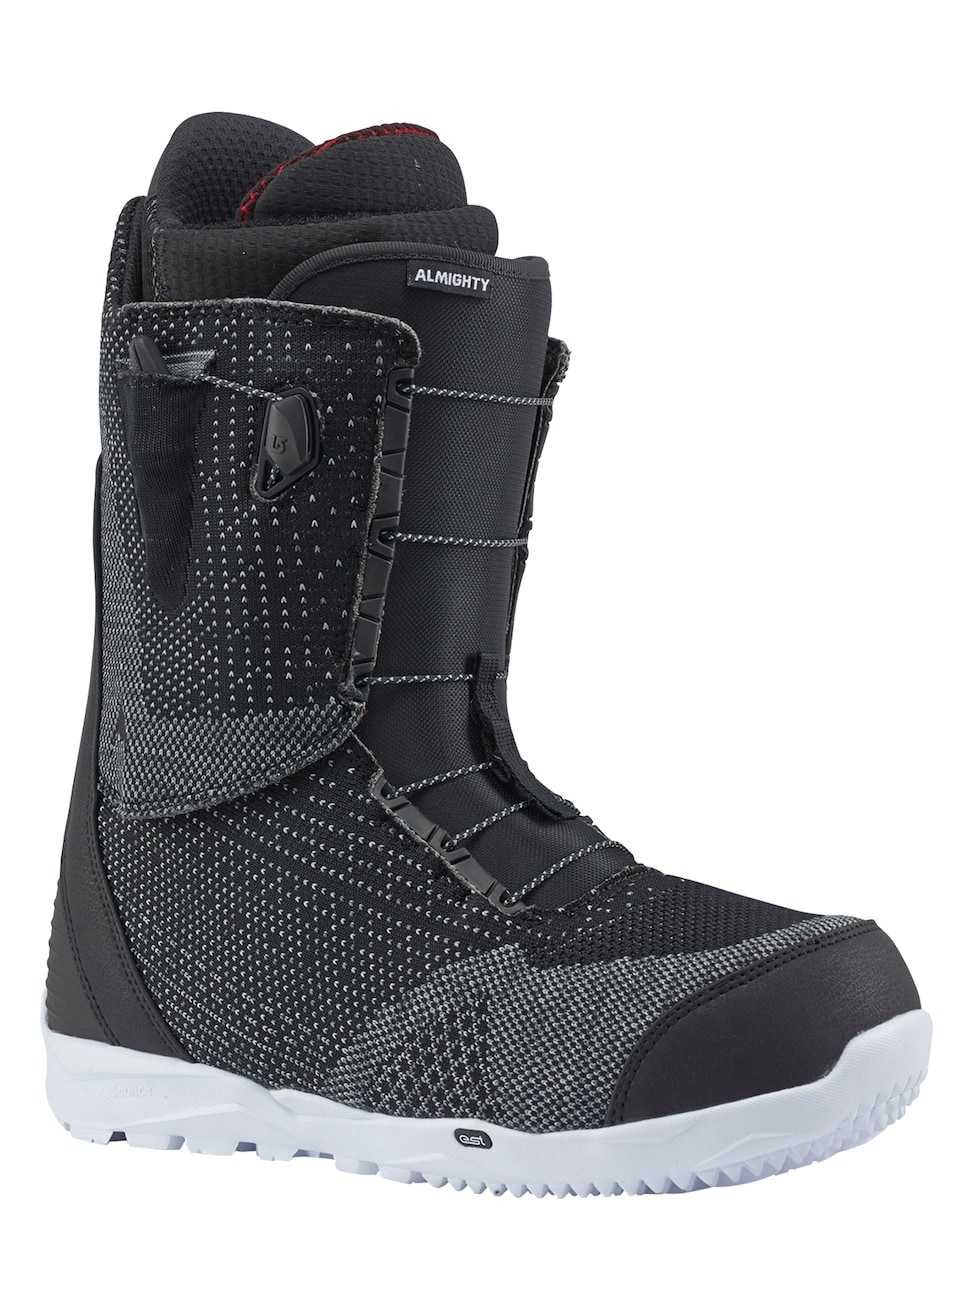 Boots Snowboard Almighty - Multiweave